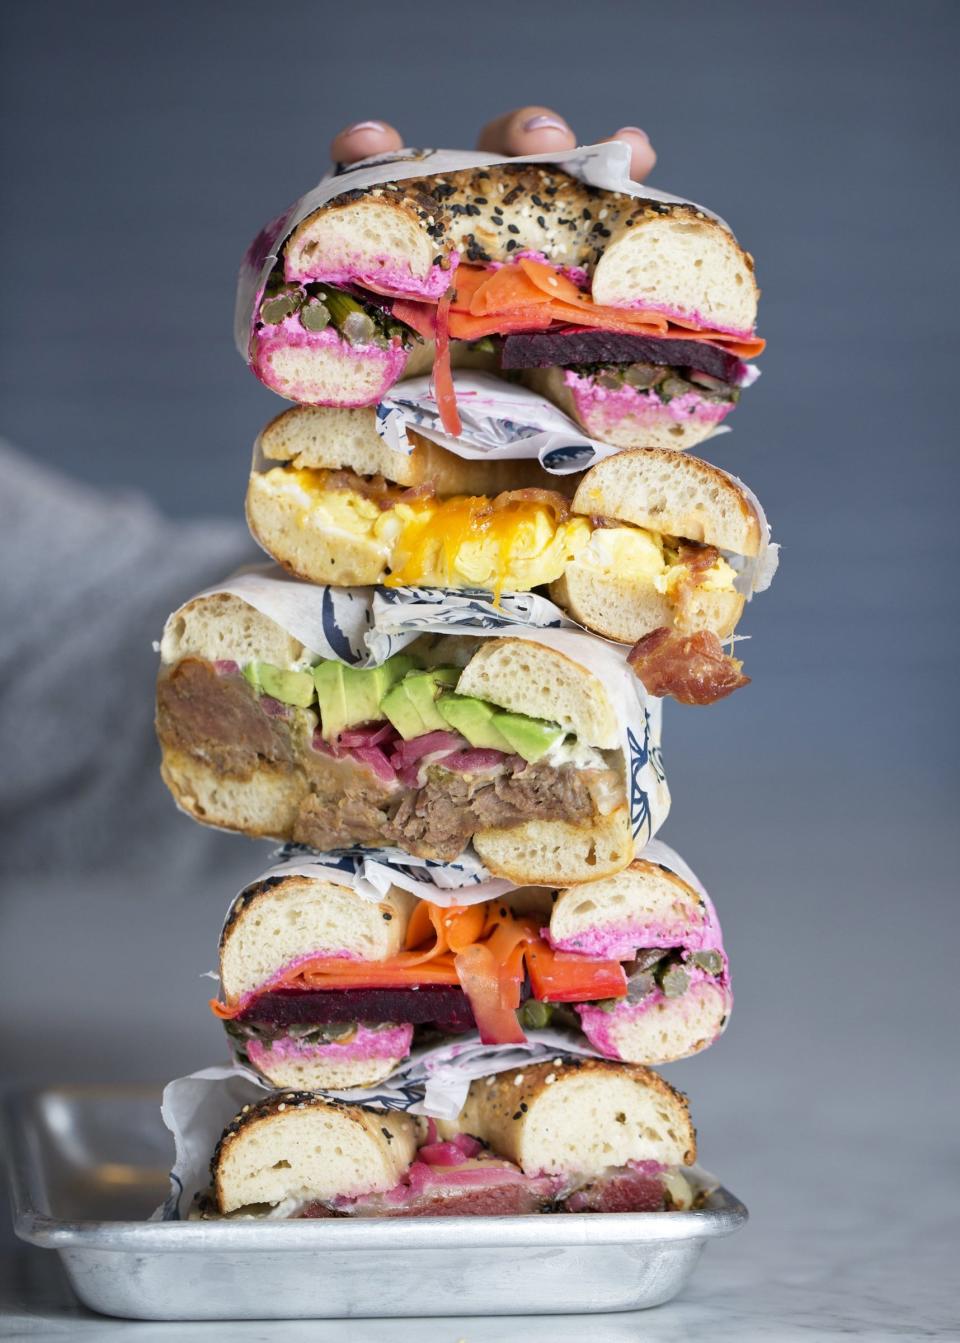 Bagels featuring, from top, veggies, egg and cheese with sausage, pork, veggies again and pastrami at The Lox Bagel Shop [TIM JOHNSON/ALIVE]